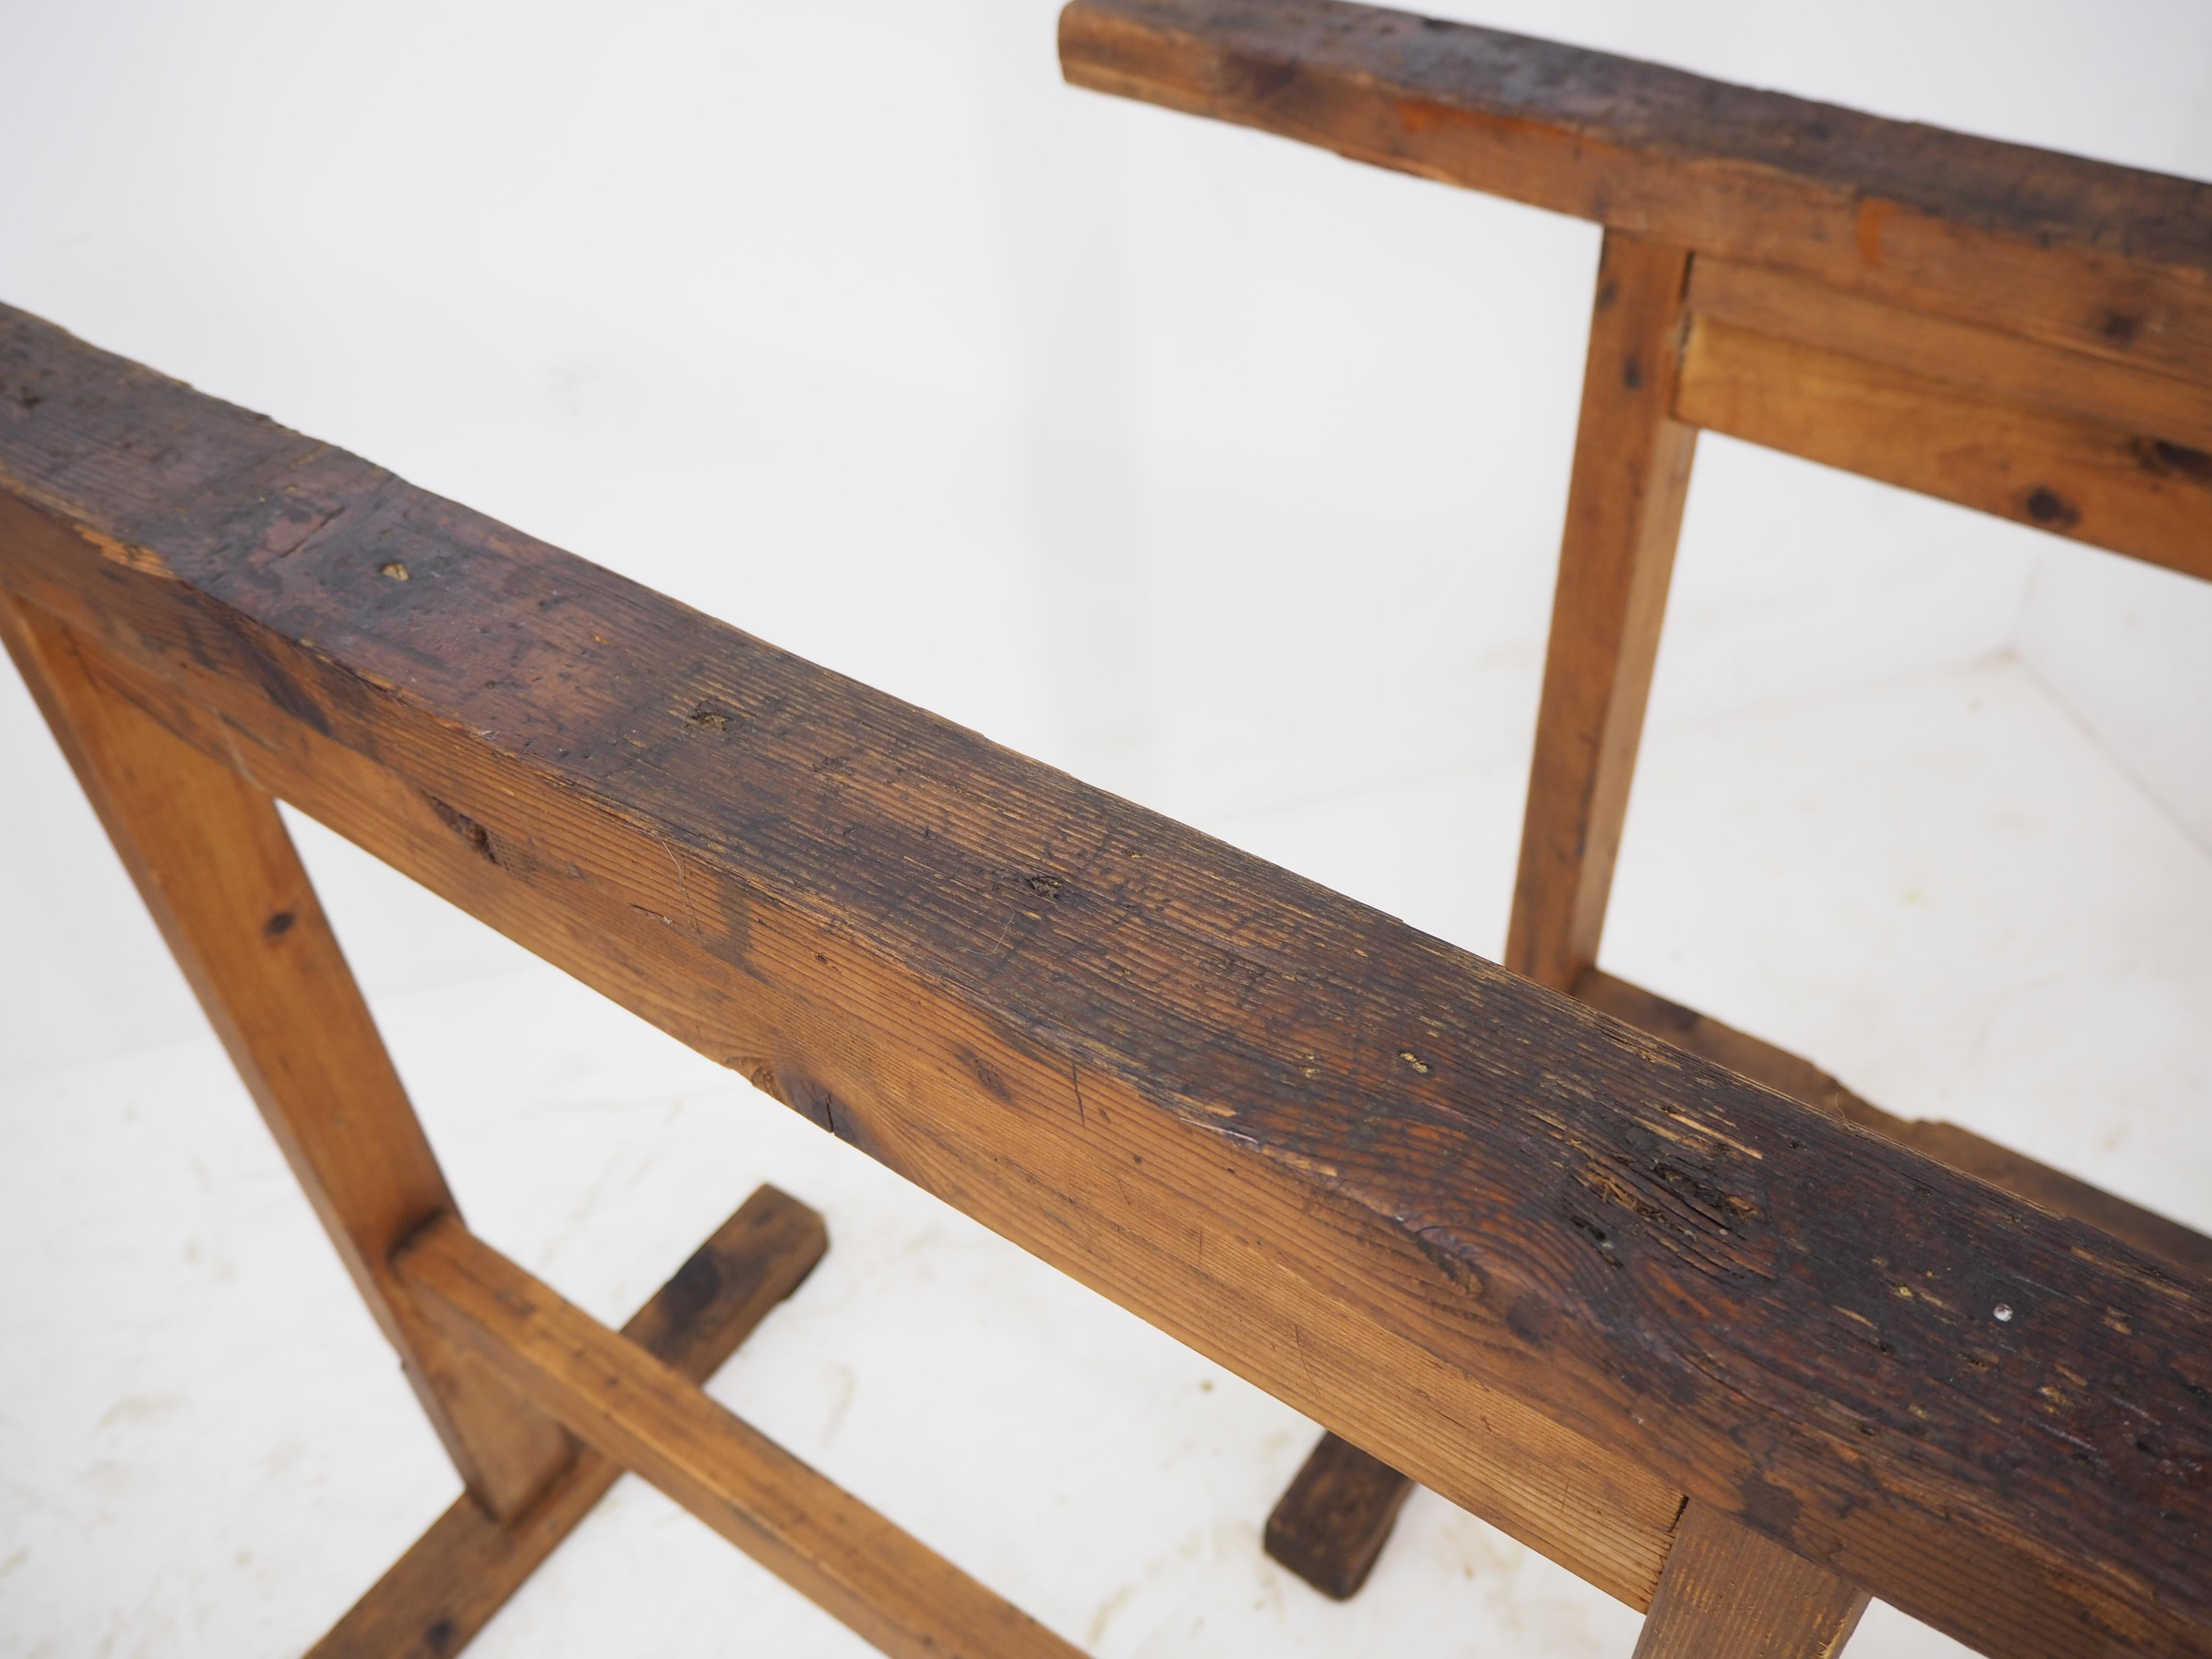 Pair of Industrial Wood Trestle Table Bases, Early 20th Century For Sale 5